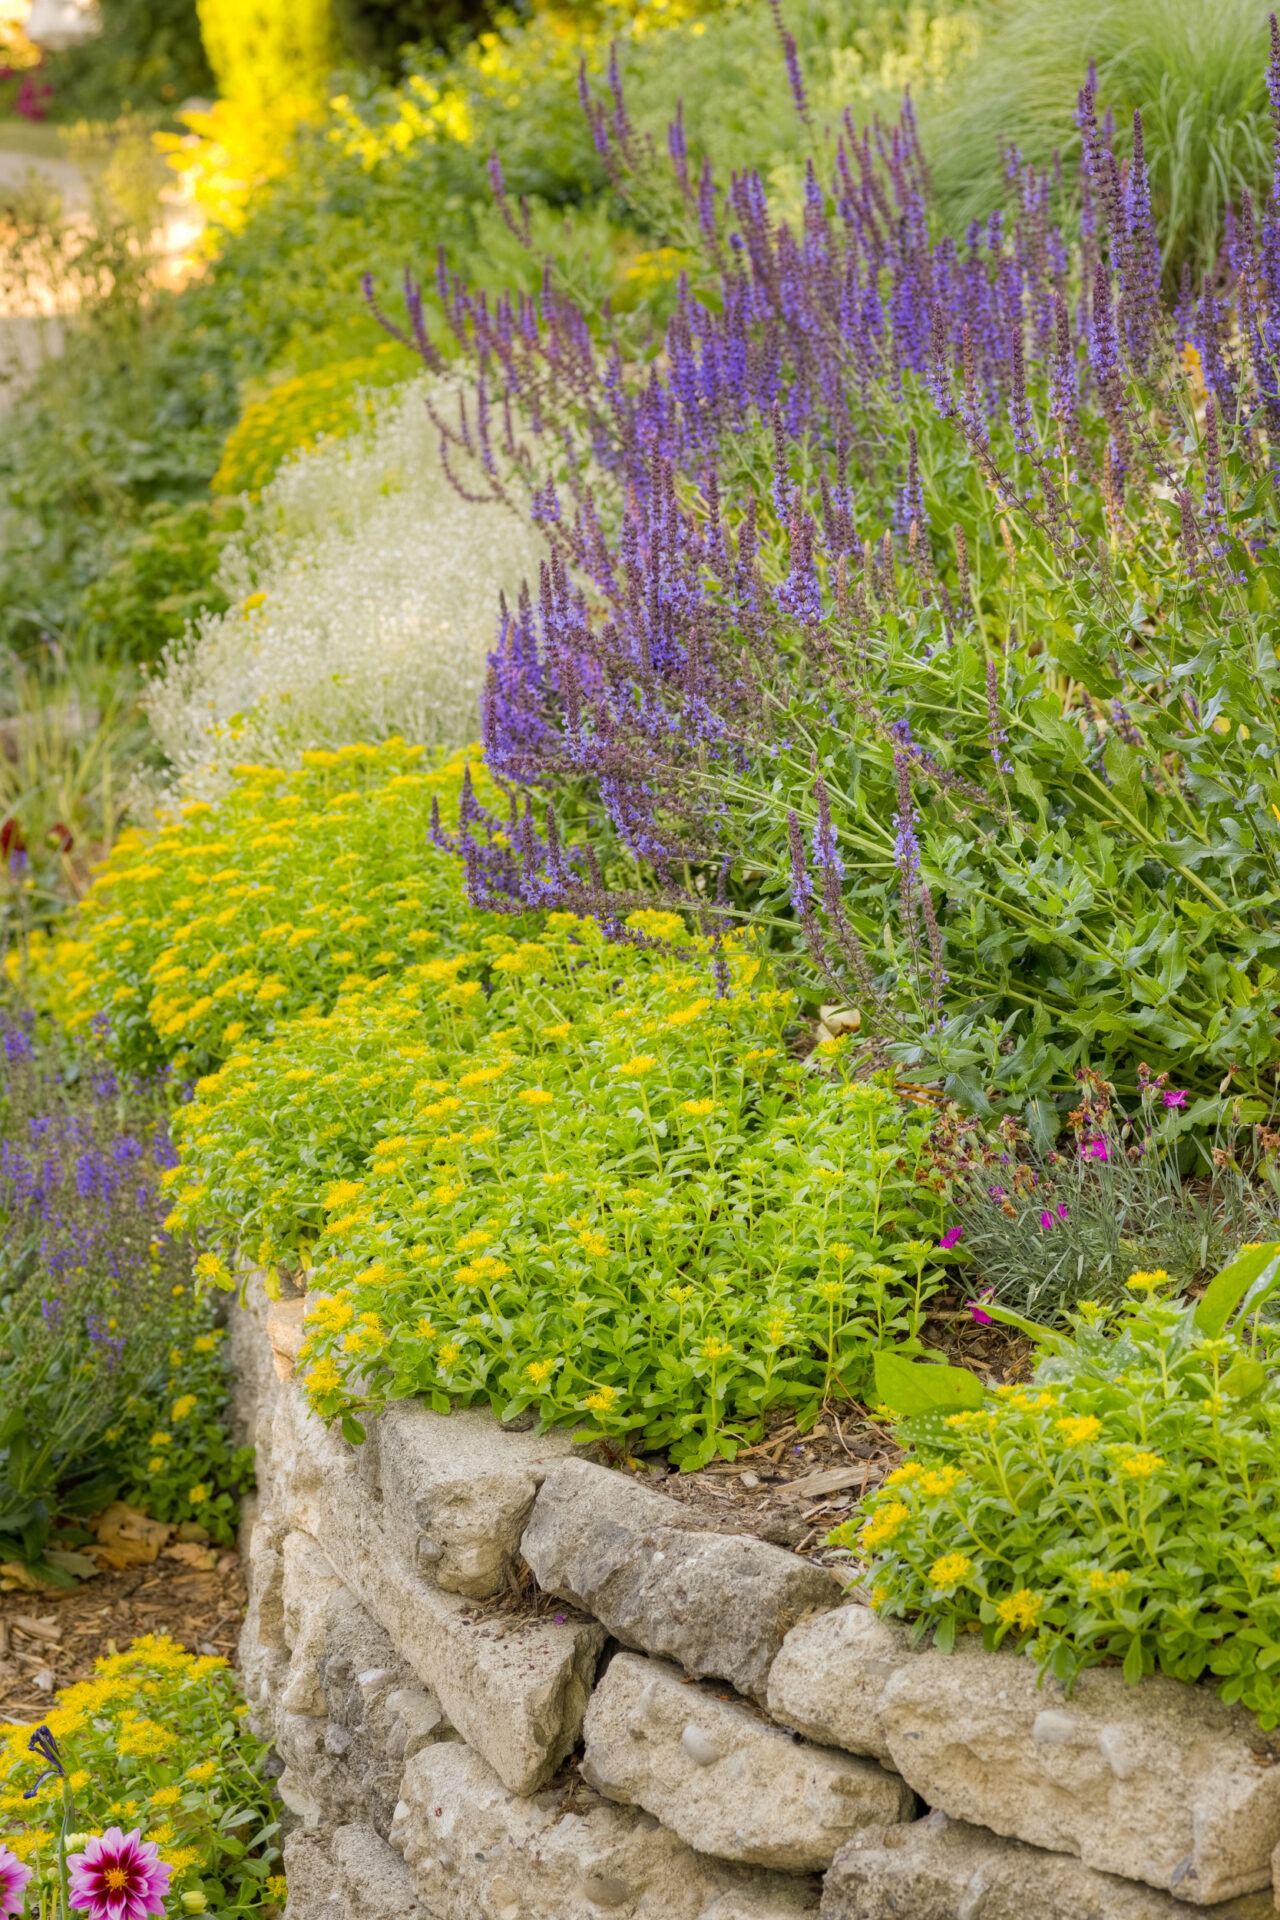 A layered garden bed with a stone edge, featuring purple salvia, white and yellow flowers, lush green foliage, and a hint of pink blooms.